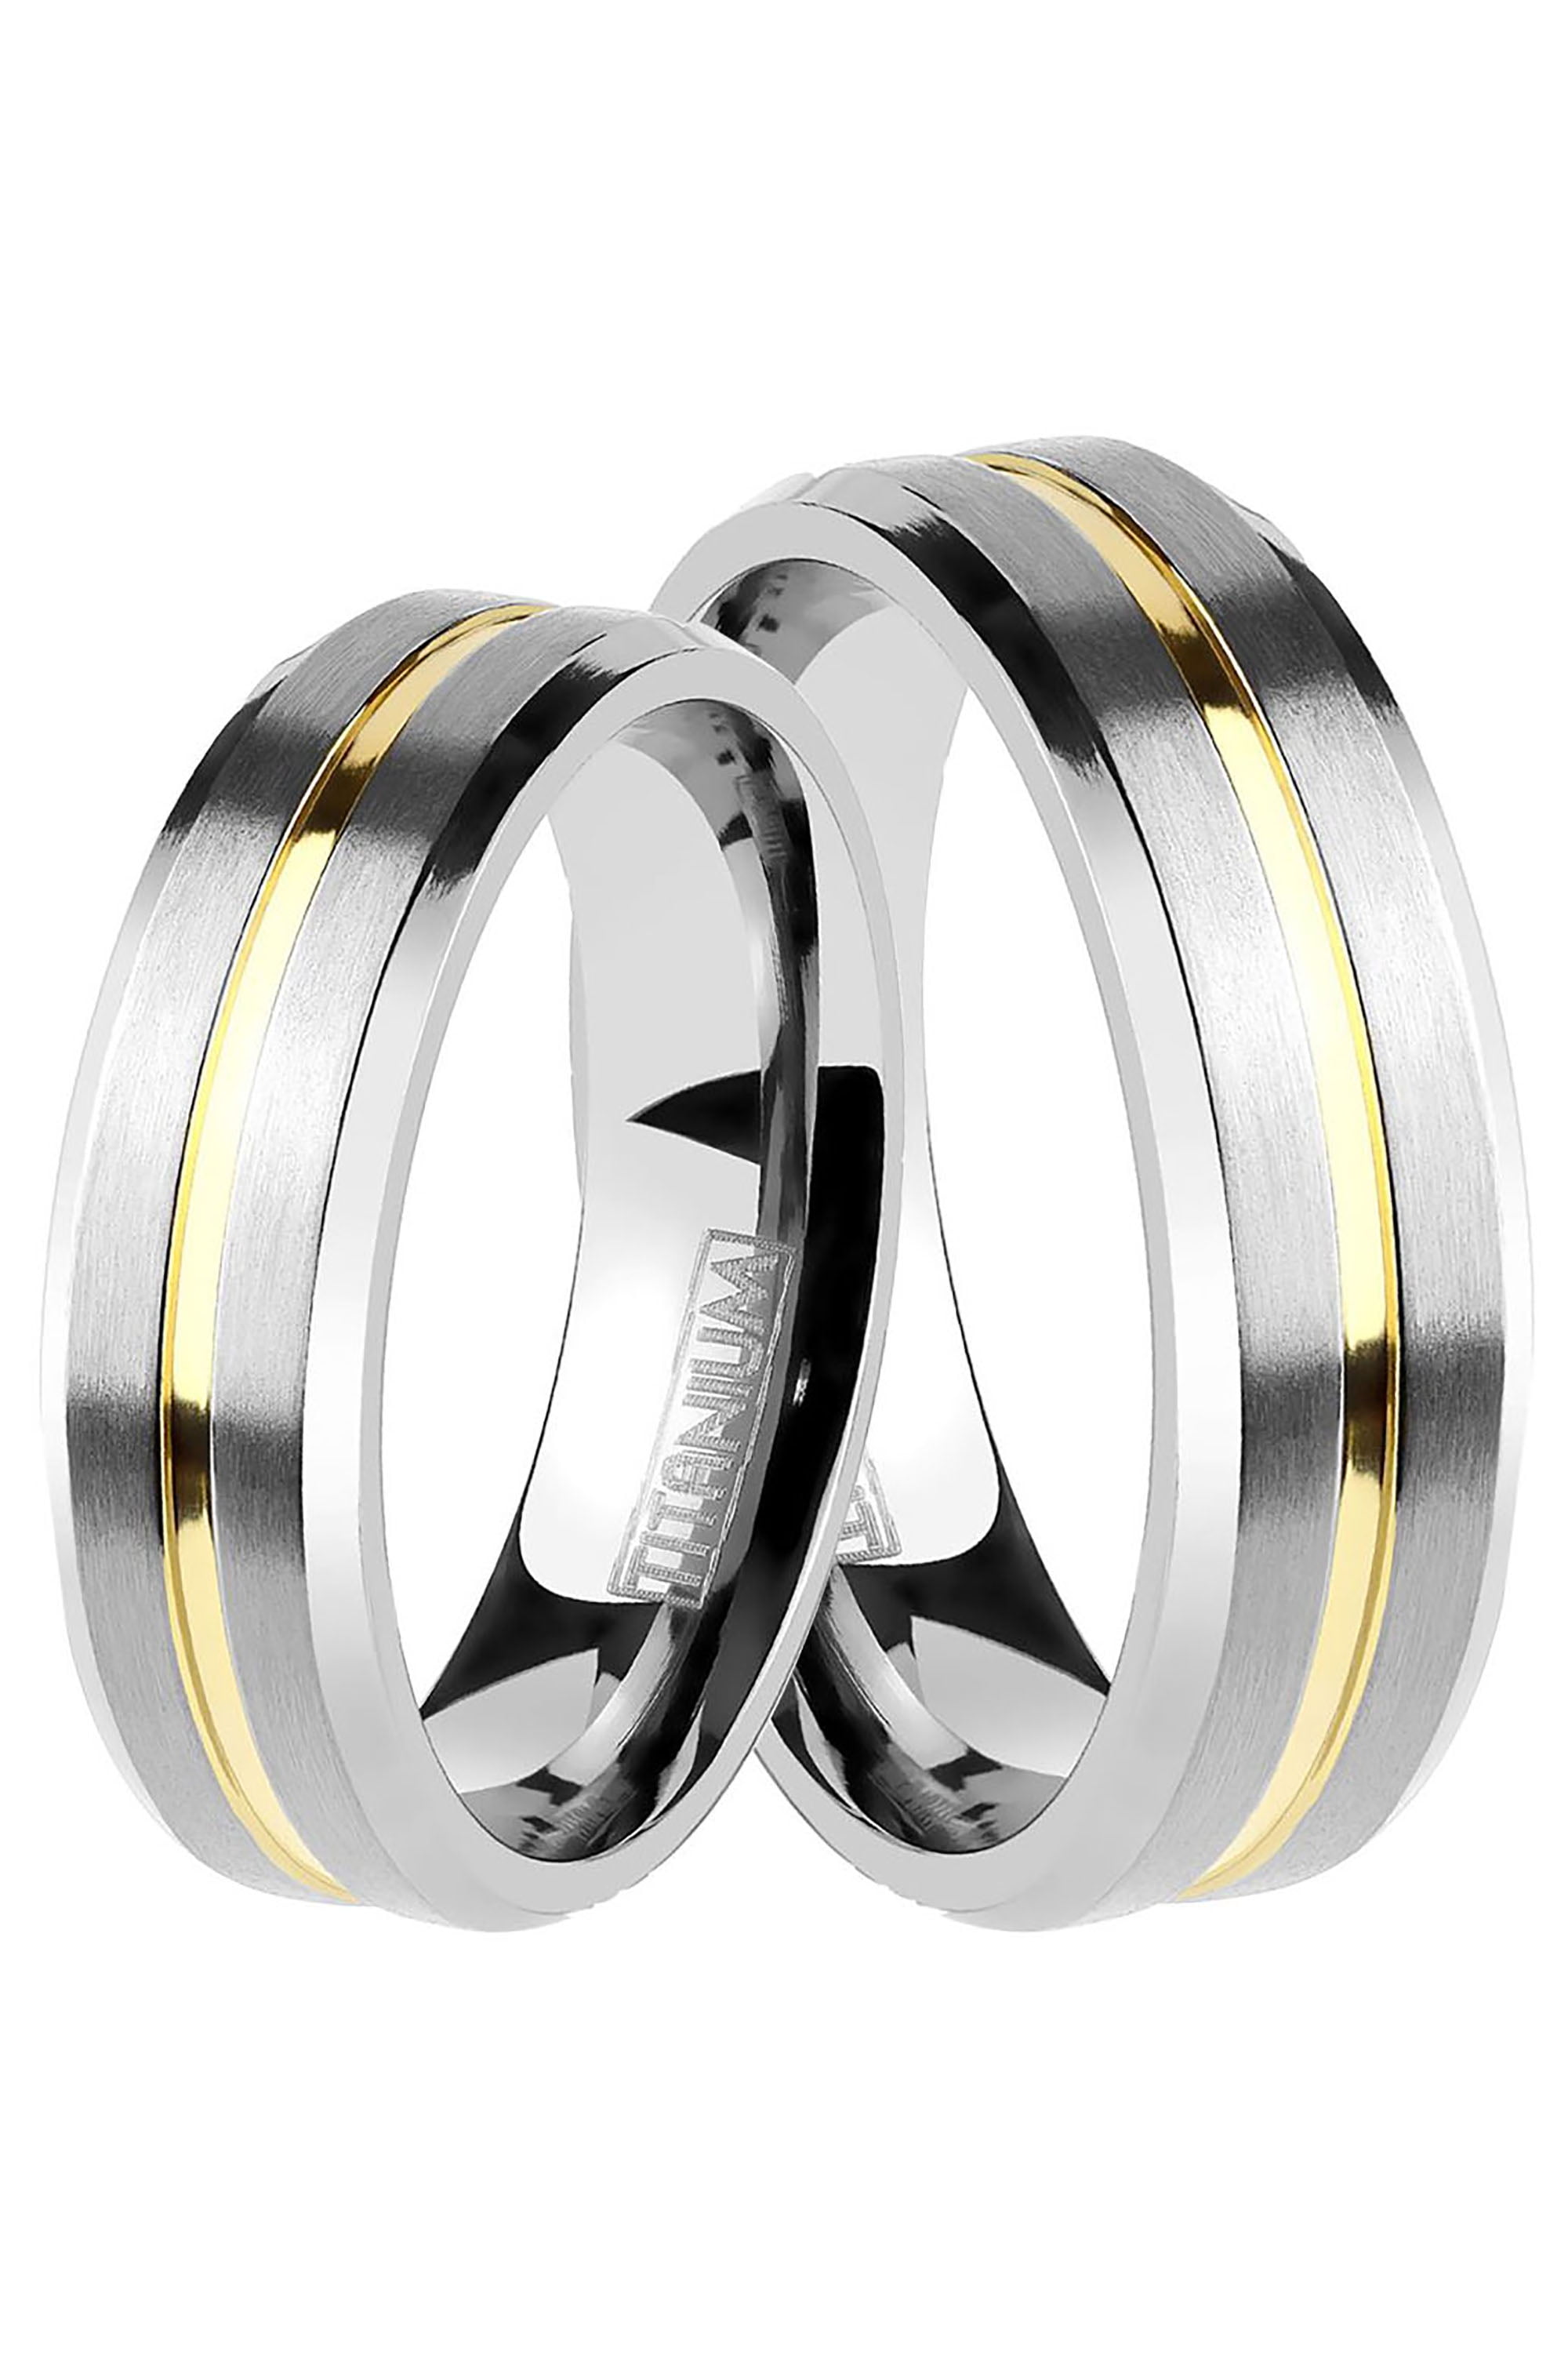 LaRaso Co His and Hers Titanium Wedding Rings  Bands  